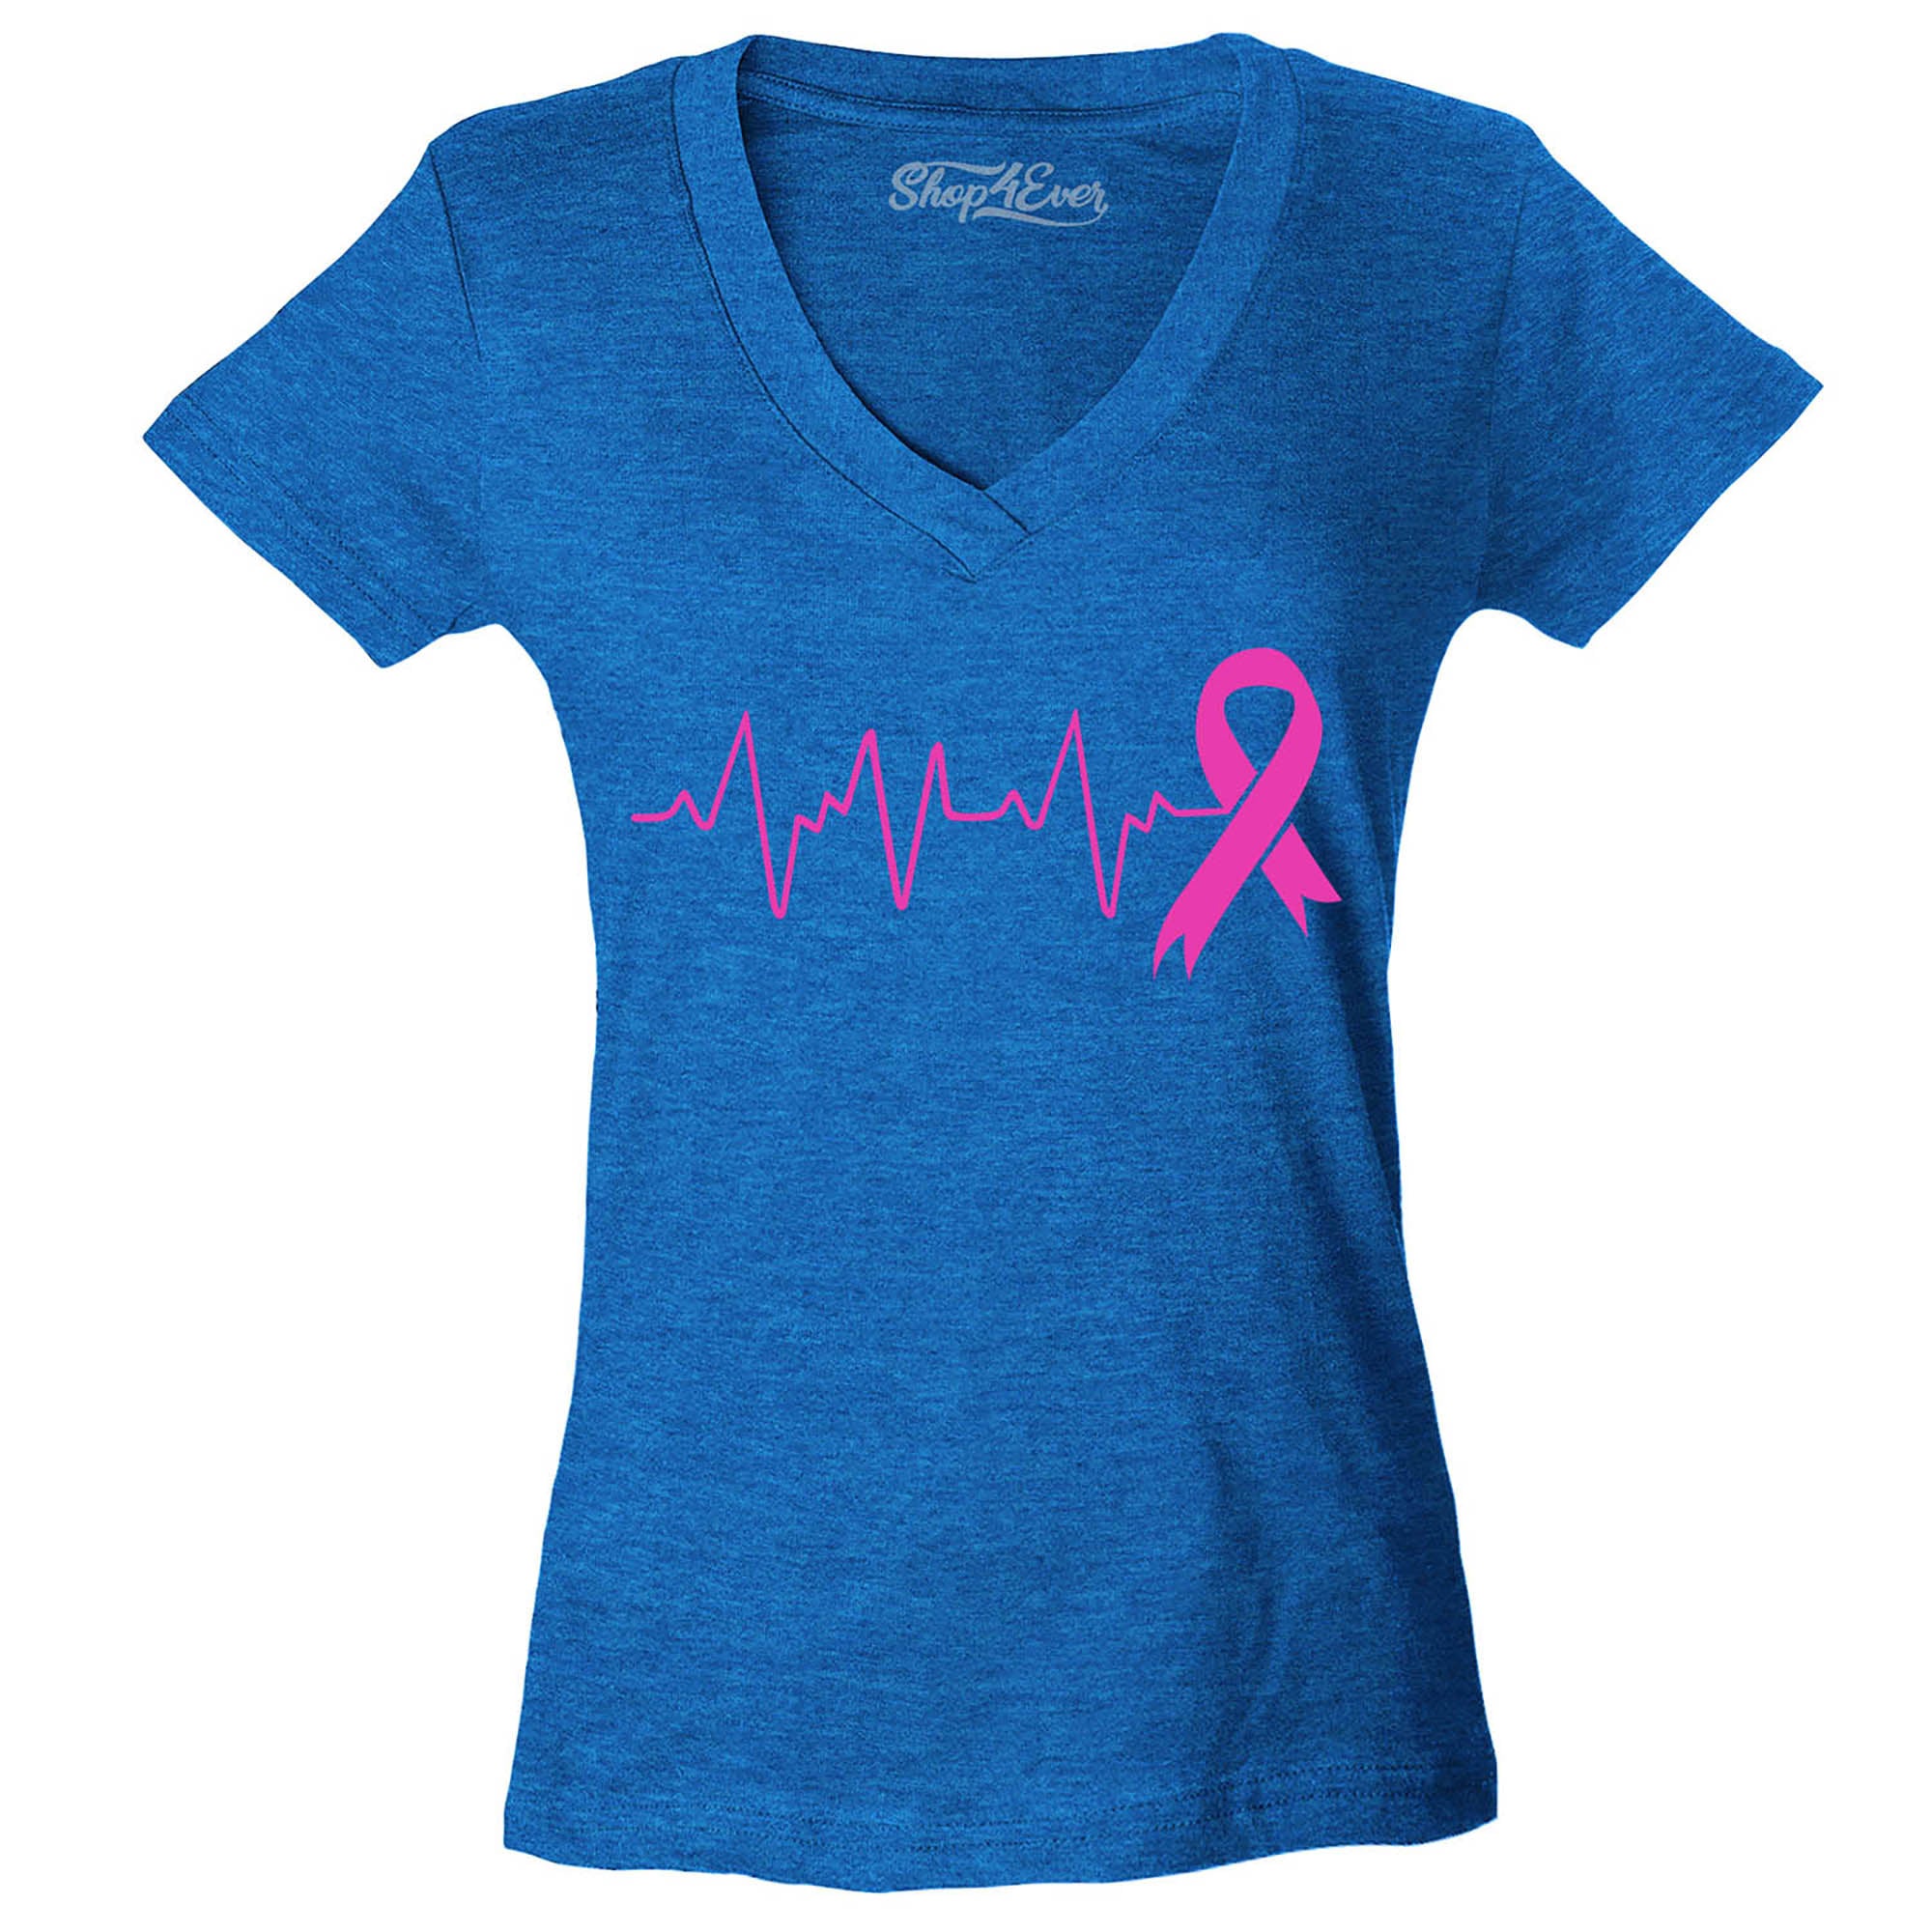 Heartbeat Pink Ribbon Breast Cancer Awareness Women's V-Neck T-Shirt Slim Fit